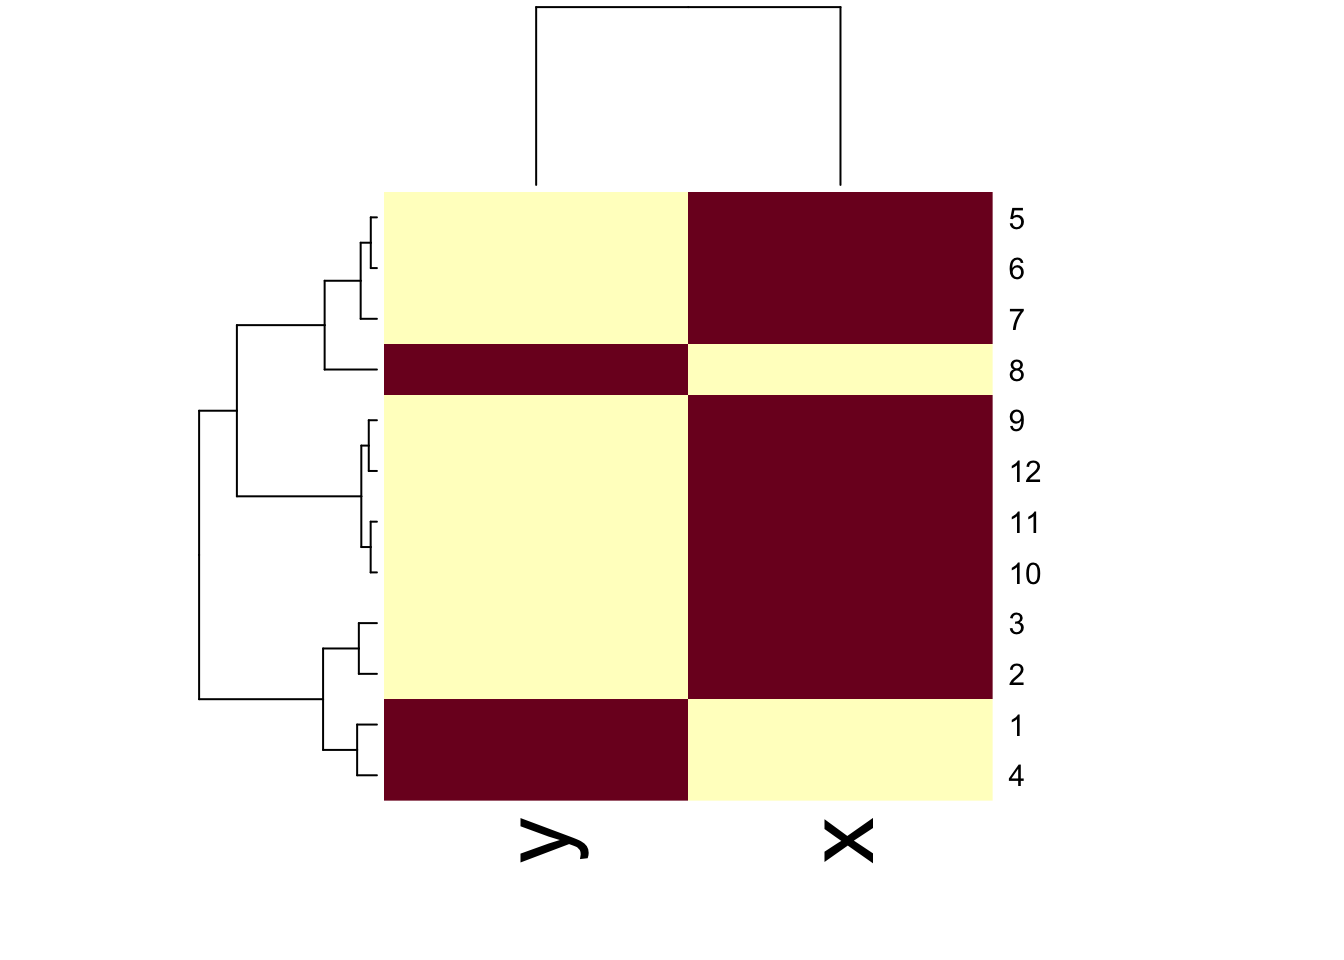 Heatmap with dendrograms on rows and columns